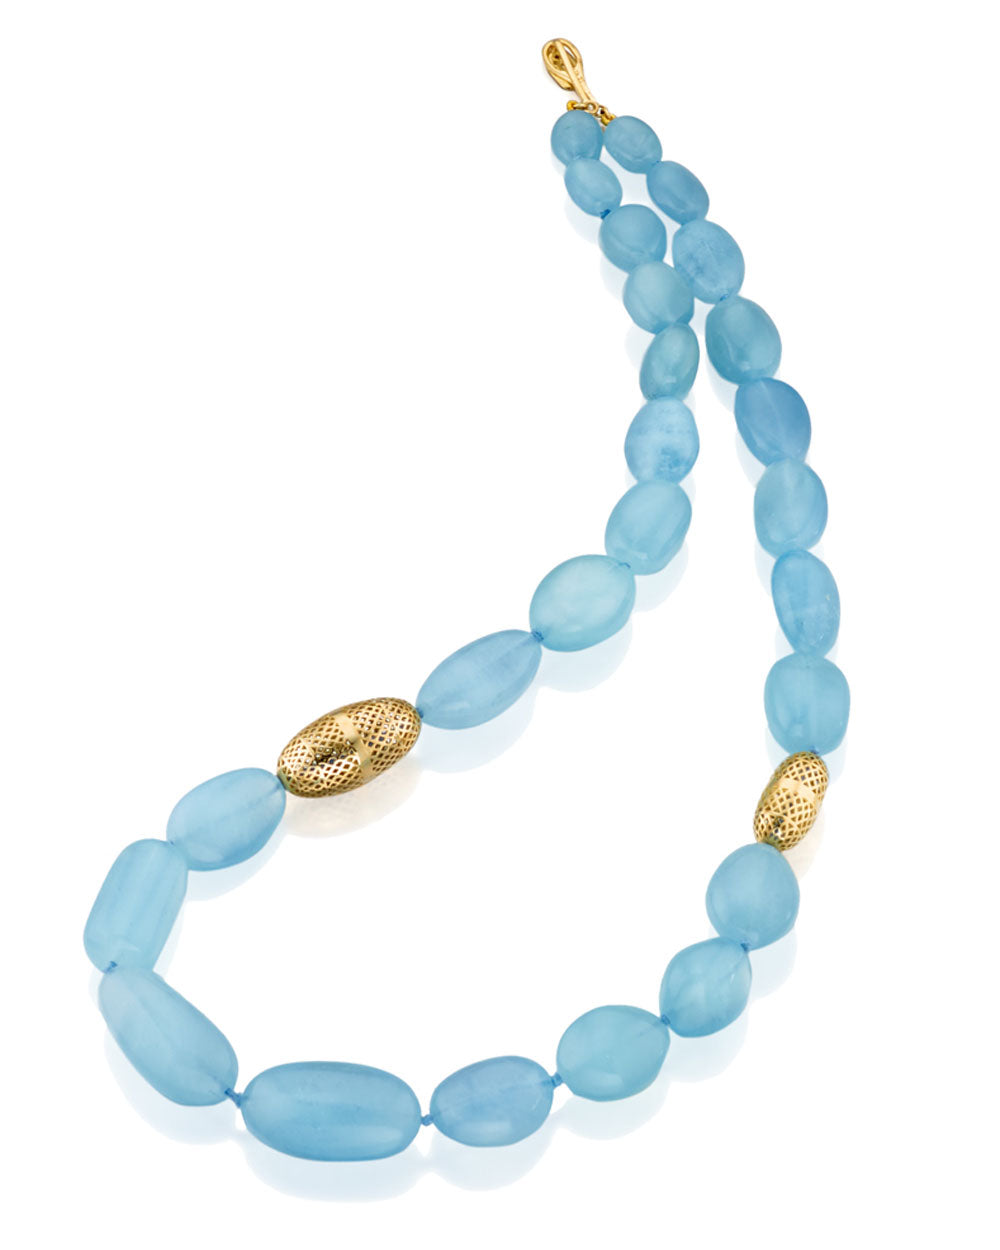 Aqua and Olive Crownwork Beaded Necklace